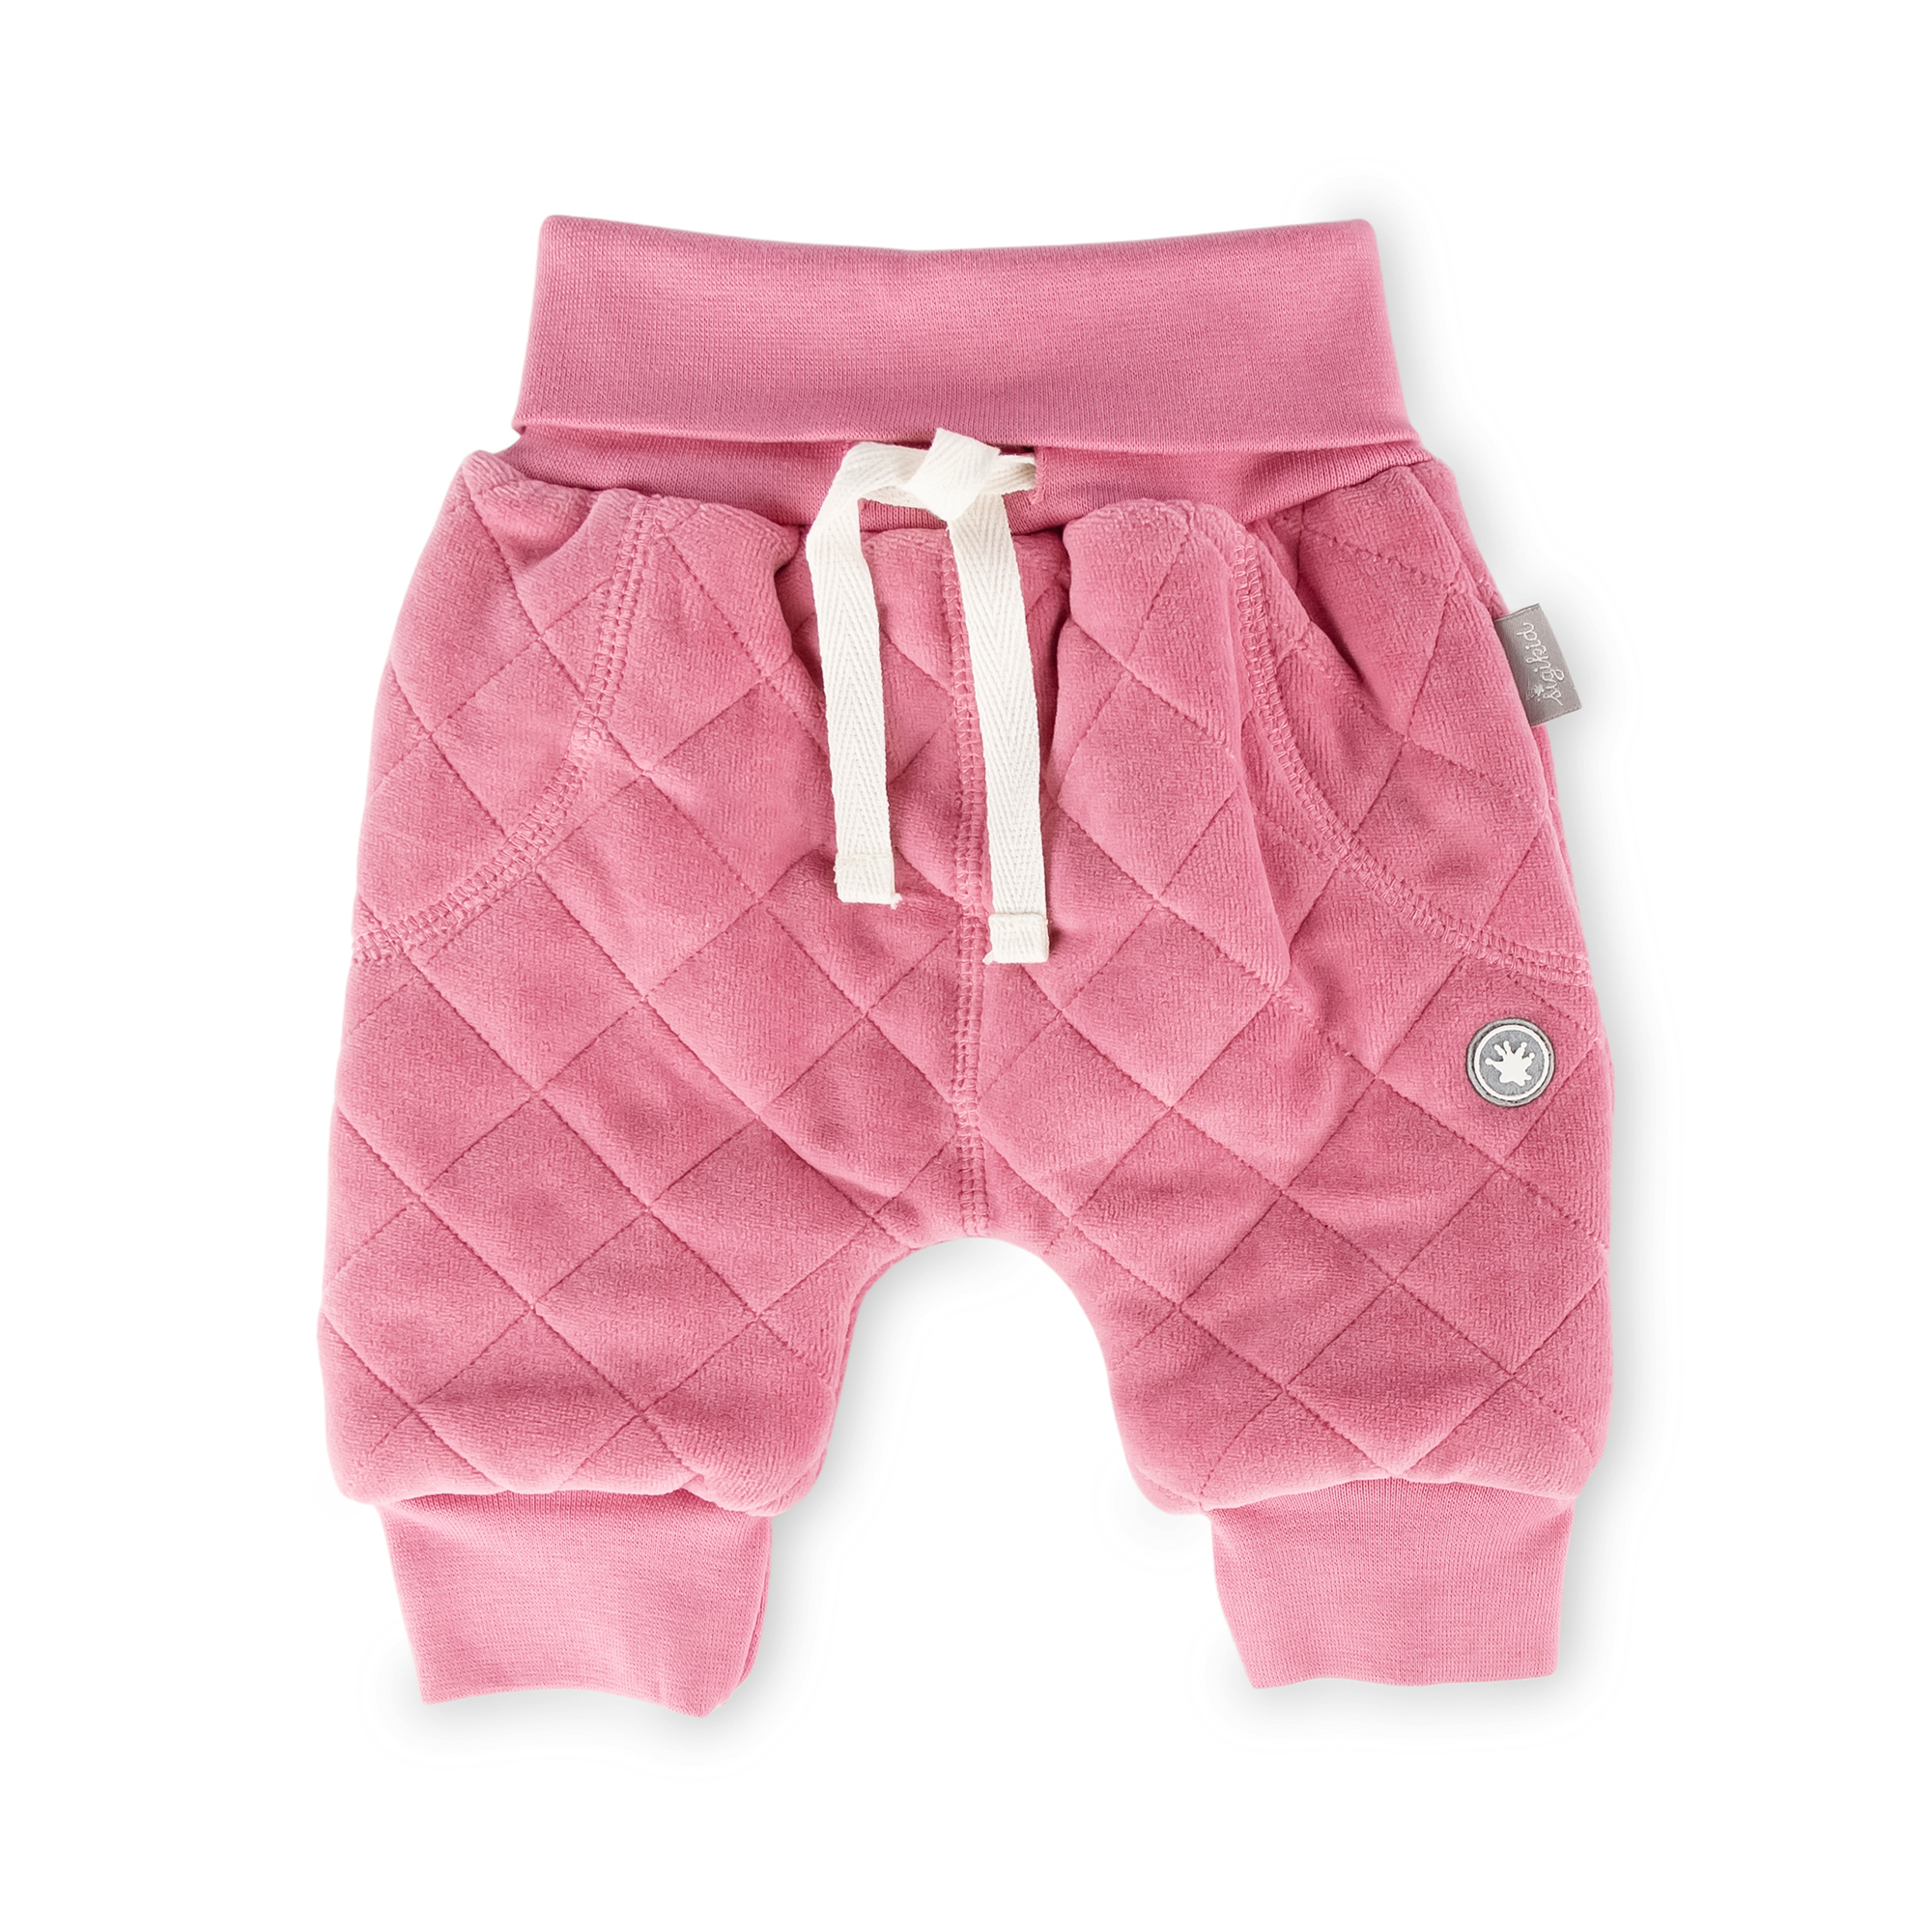 Baby quilted velour pants, lined, pink